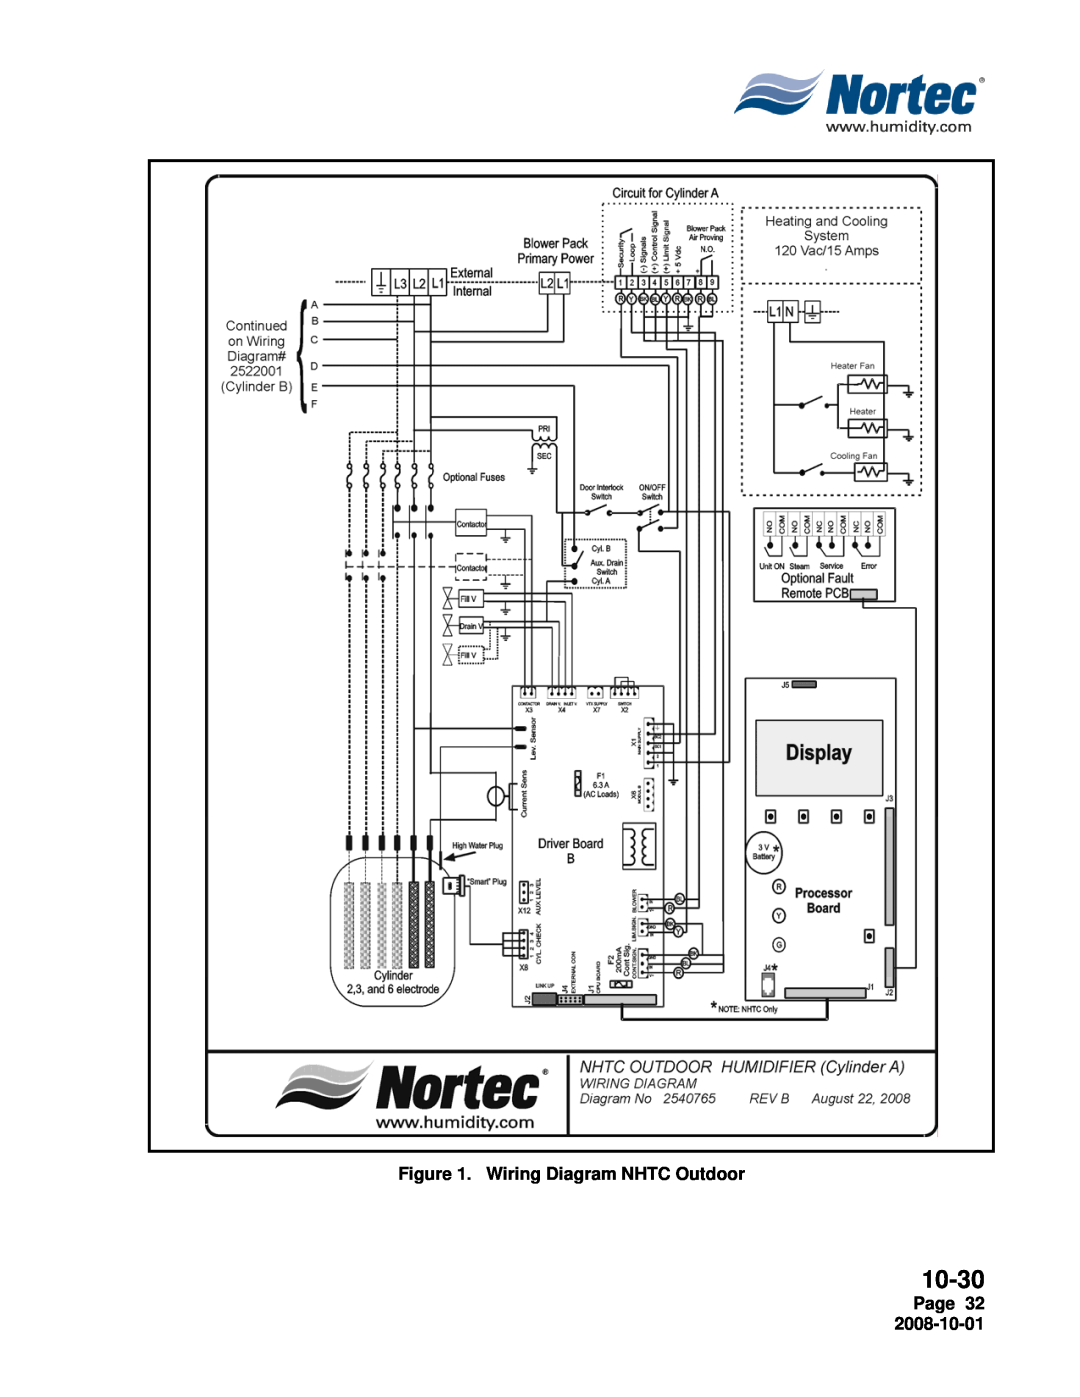 Nortec Industries NH Series installation manual 10-30, Wiring Diagram NHTC Outdoor, Page 